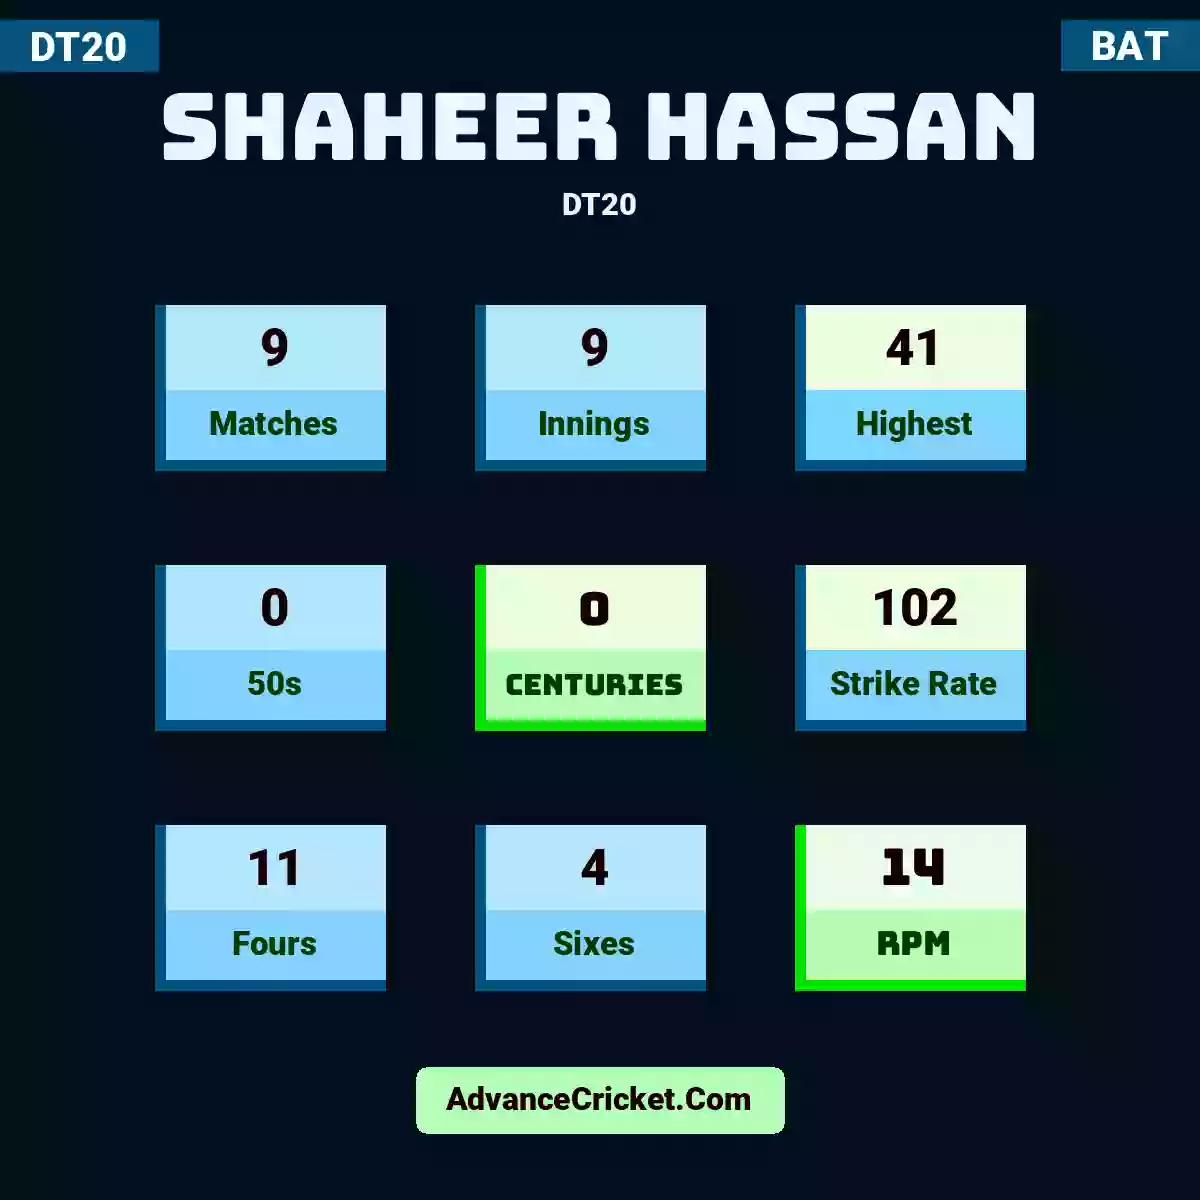 Shaheer Hassan DT20 , Shaheer Hassan played 9 matches, scored 41 runs as highest, 0 half-centuries, and 0 centuries, with a strike rate of 102. S.Hassan hit 11 fours and 4 sixes, with an RPM of 14.